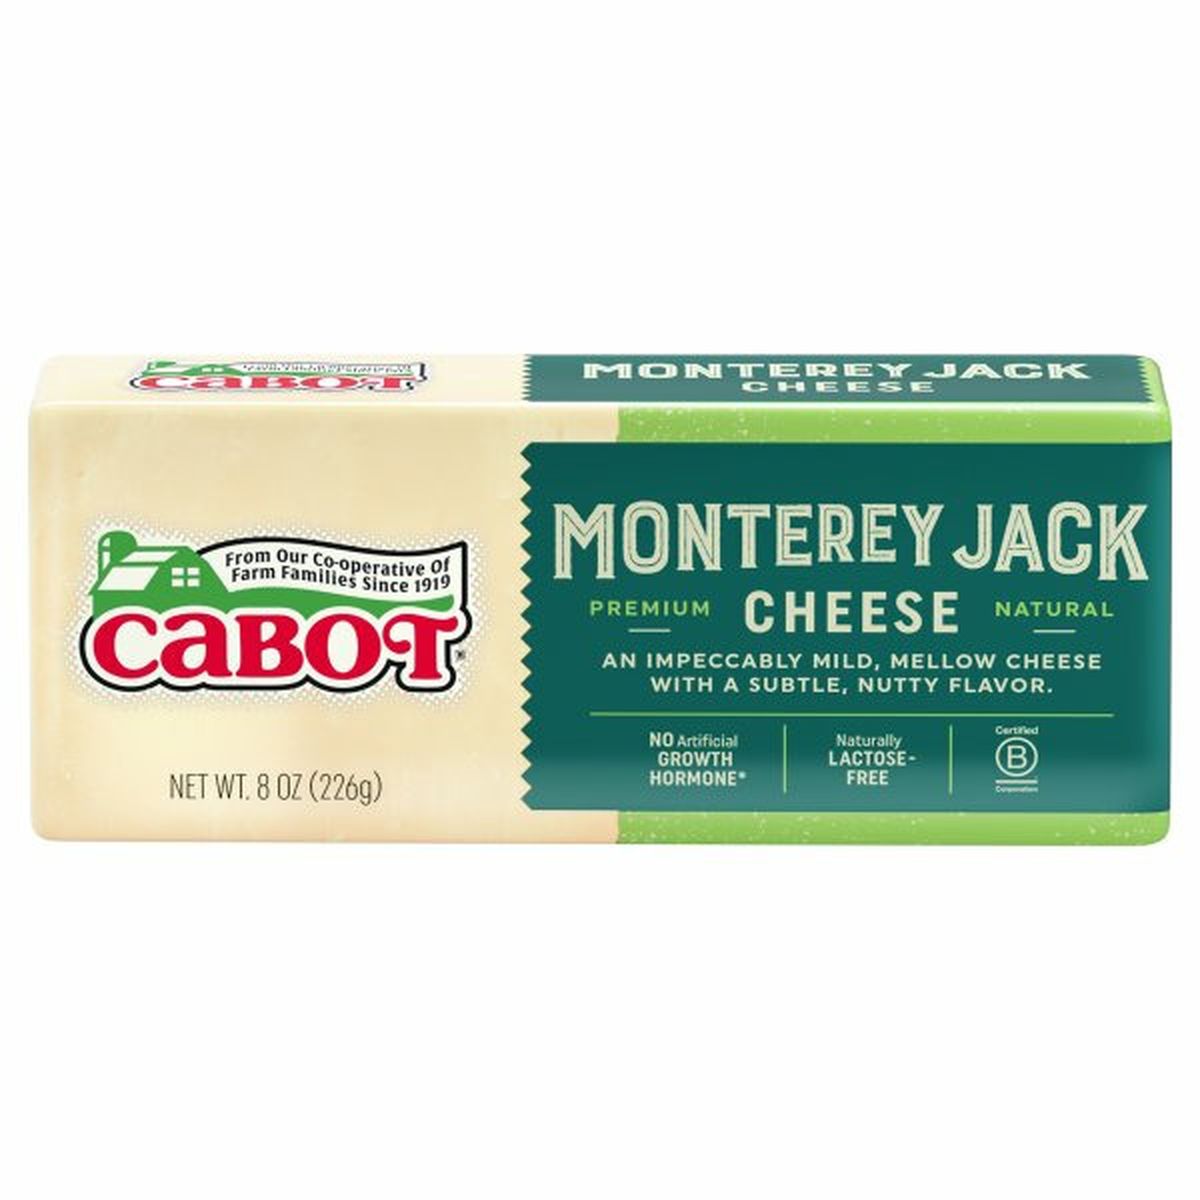 Calories in Cabot Cheese, Monterey Jack